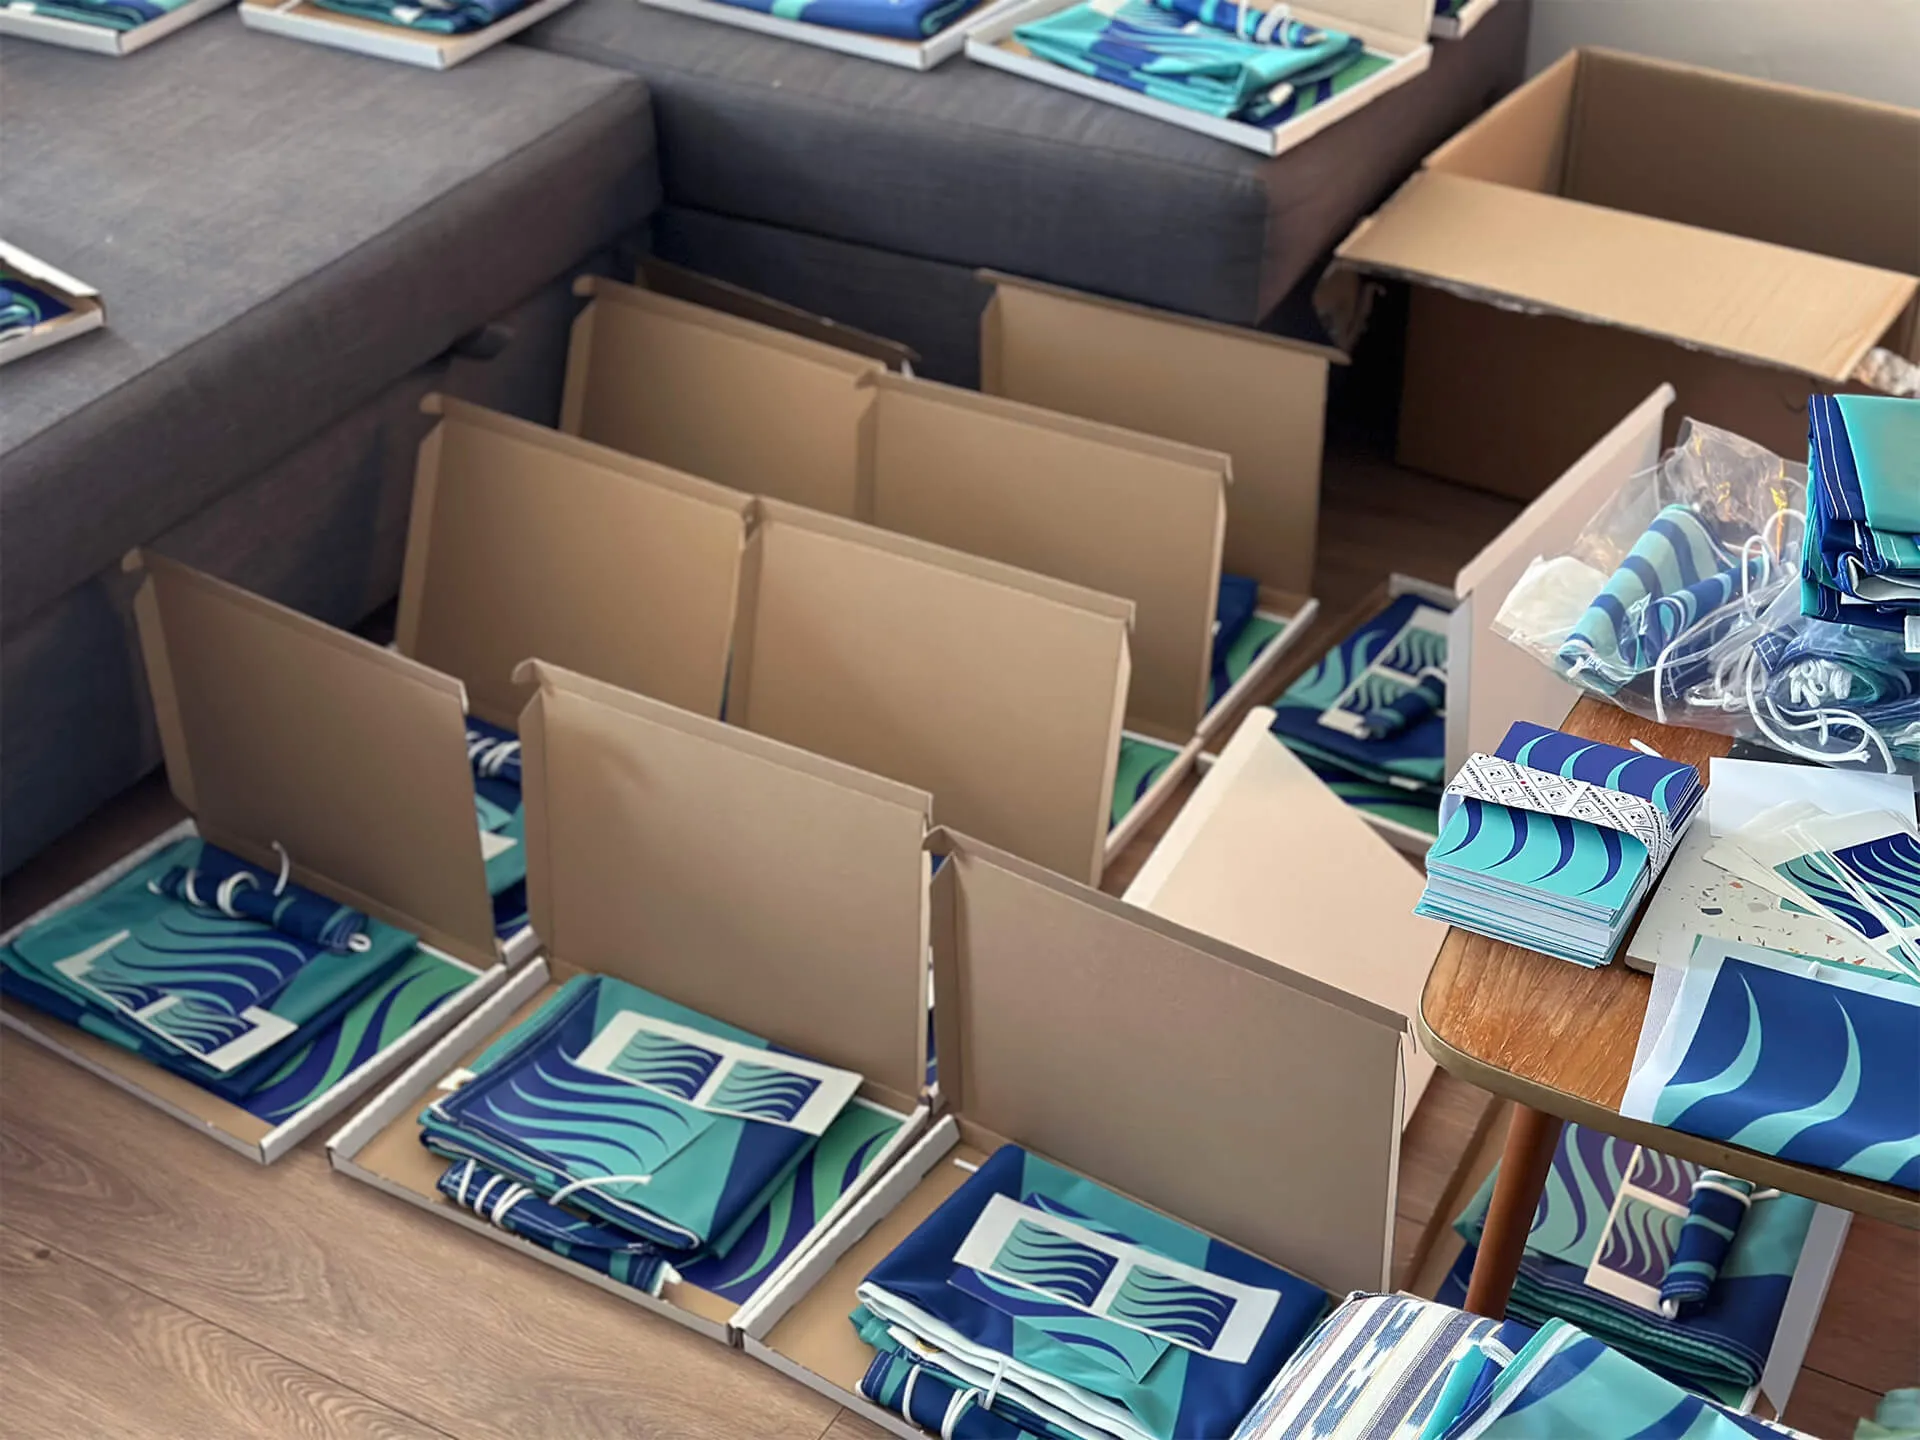 Numerous boxes are on the floor, containing stickers, postcards and flags. The flag design is seagreen and ultramarine blue waves. 